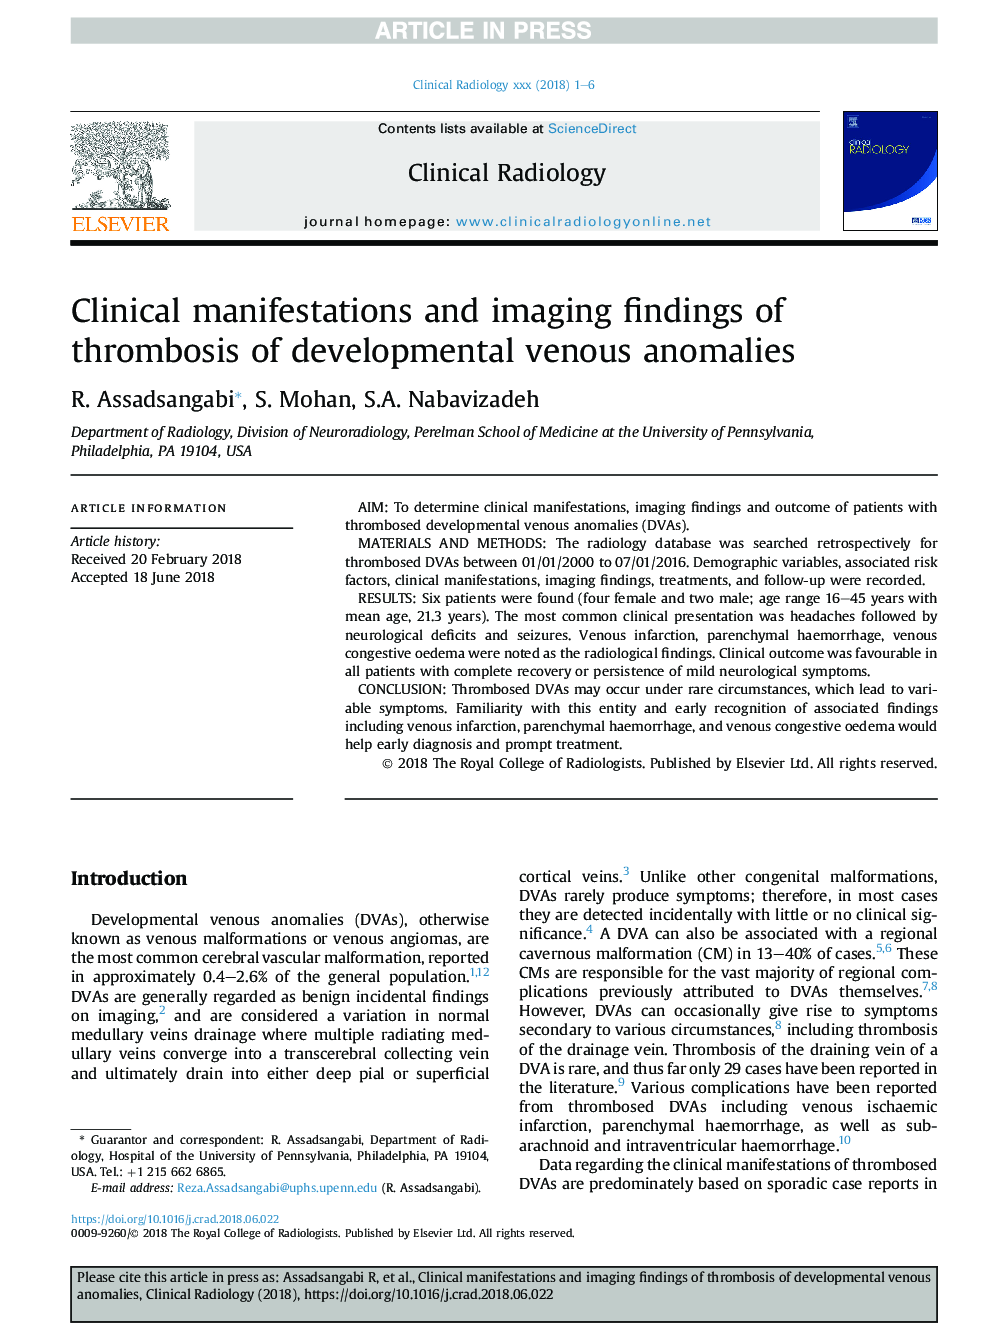 Clinical manifestations and imaging findings of thrombosis of developmental venous anomalies